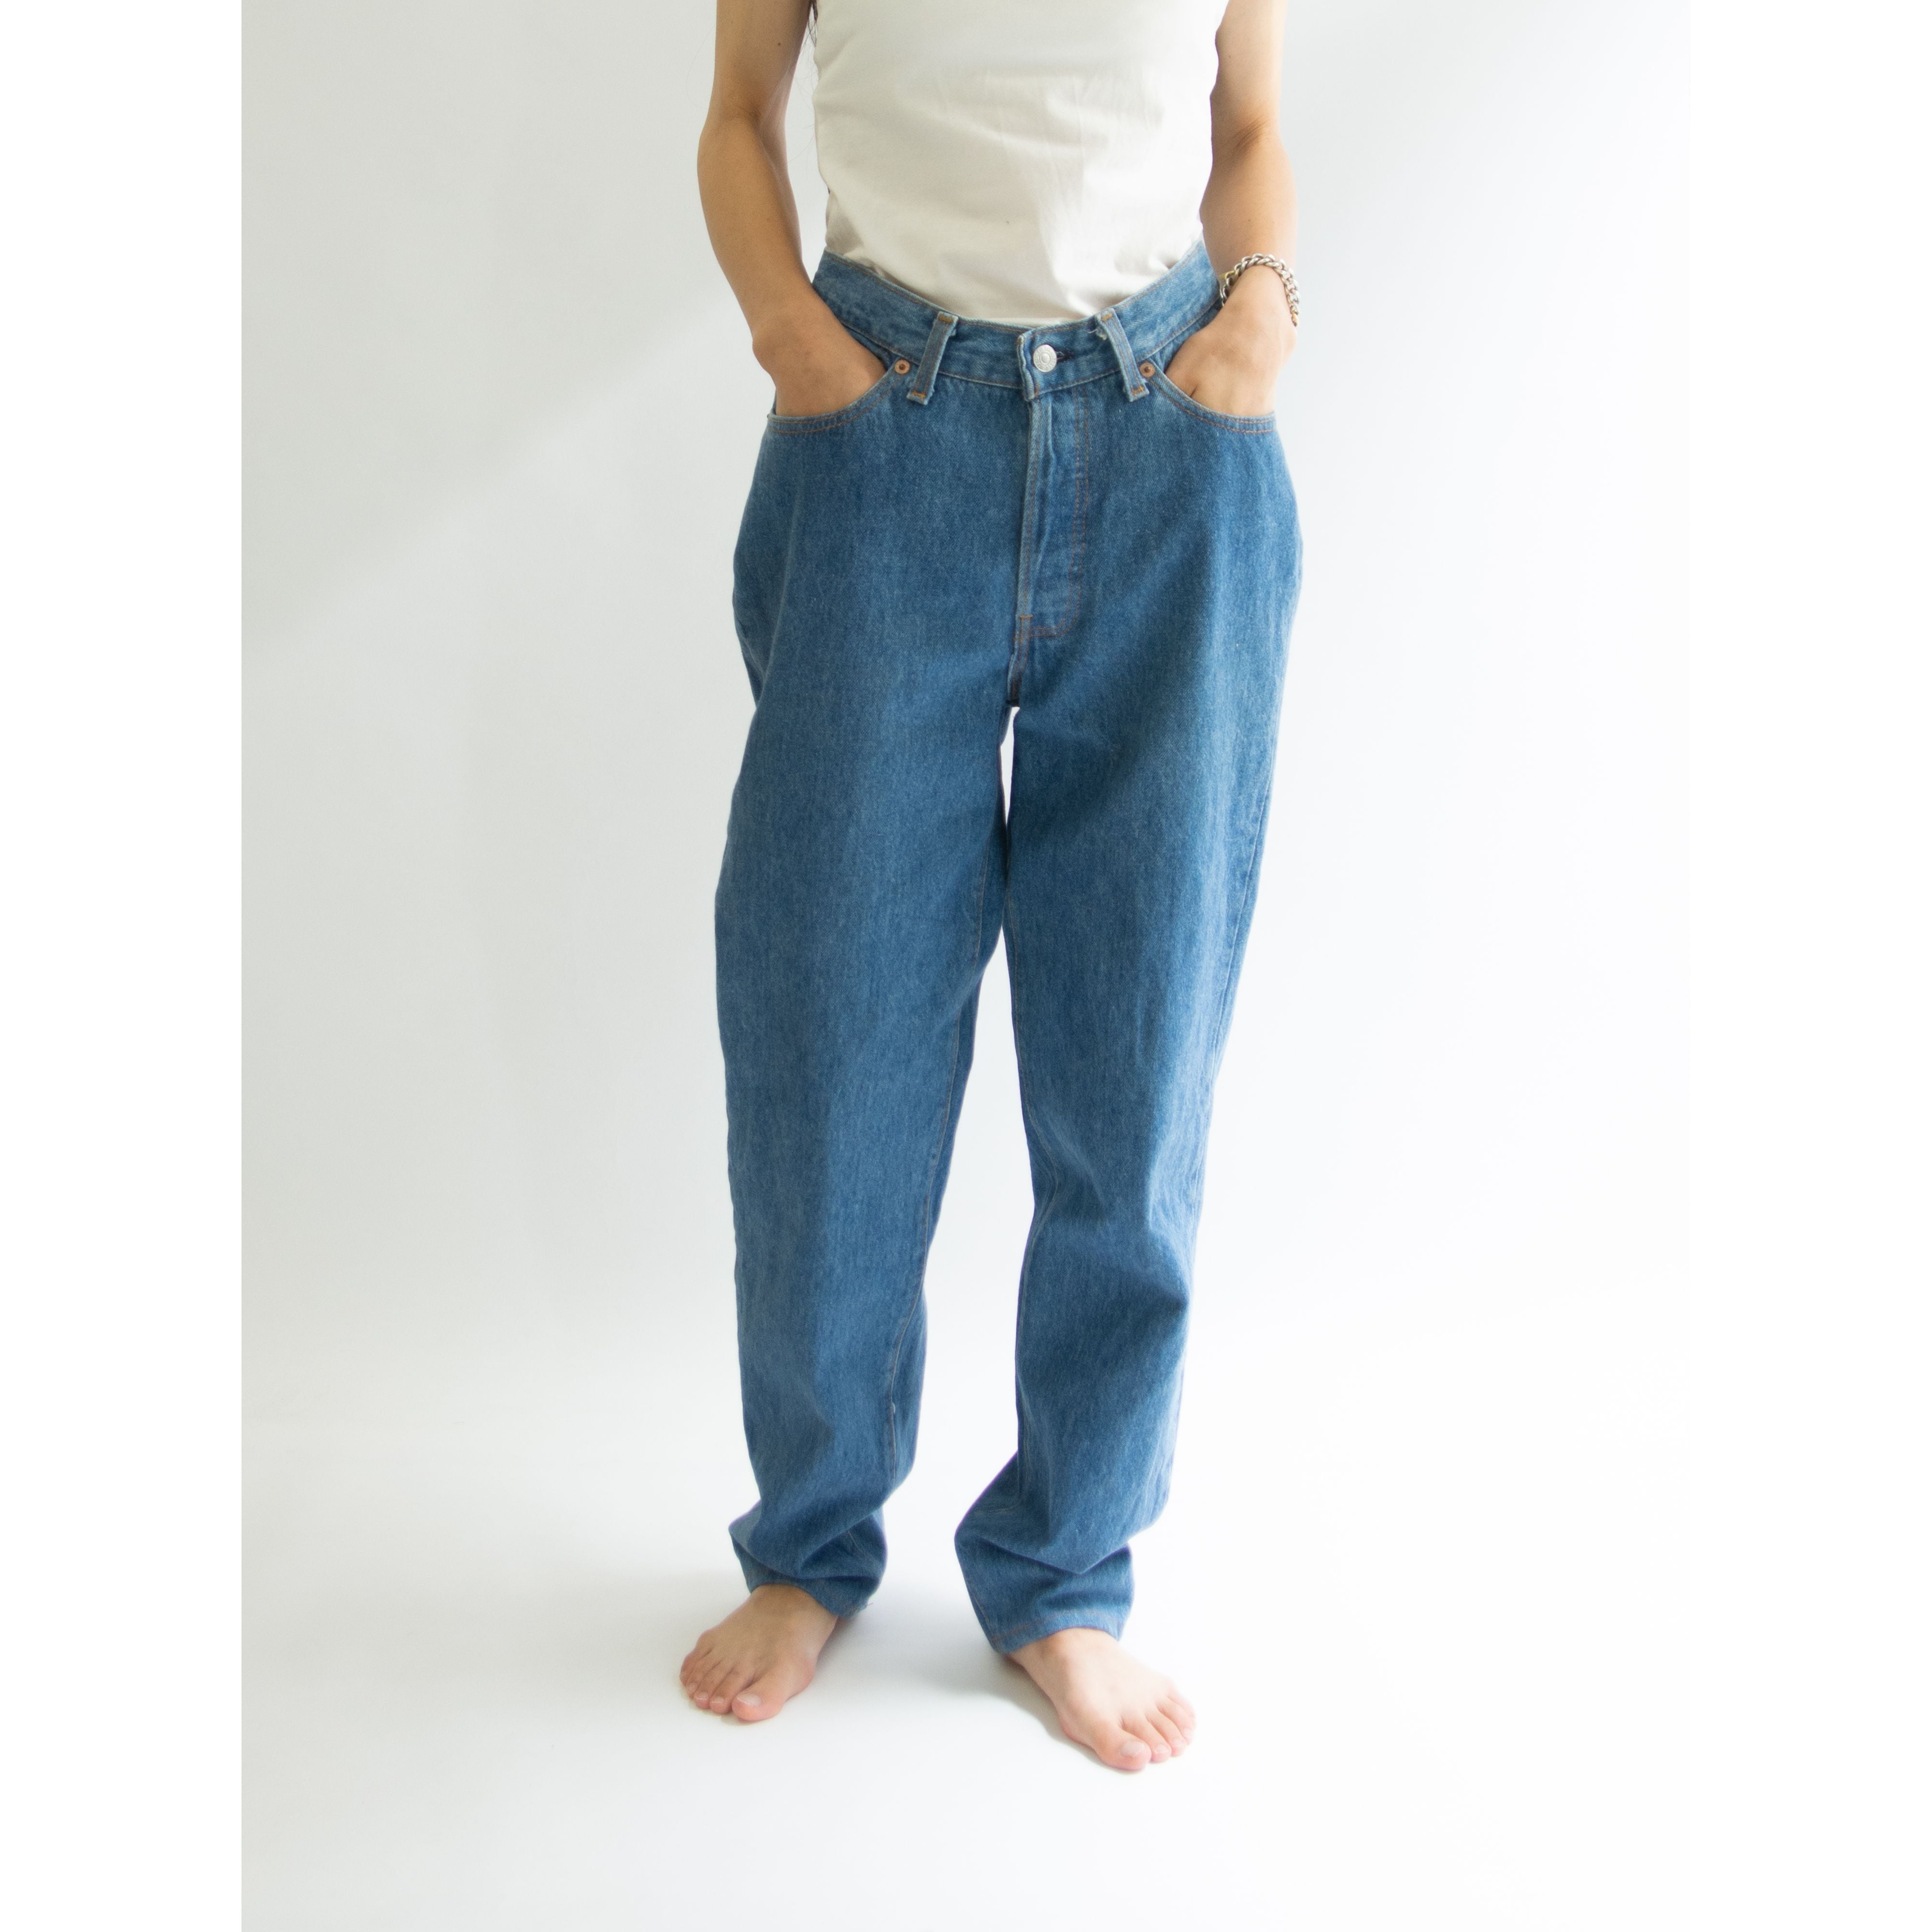 LEVI'S 17501】Made in U.S.A. 90's tapered denim pants 9M ...